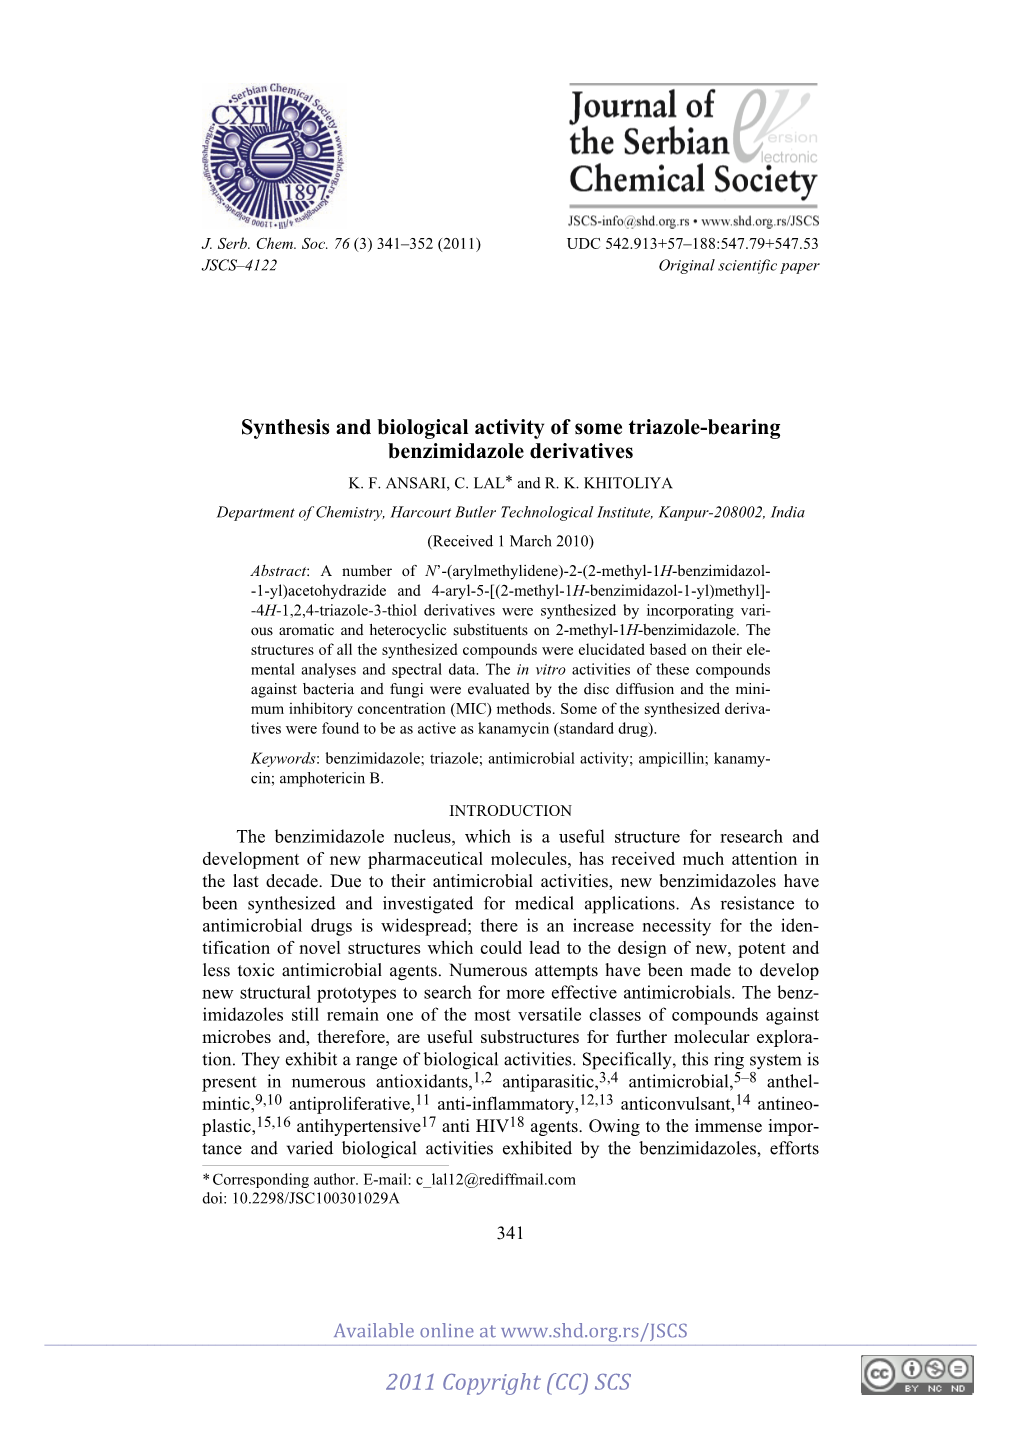 Synthesis and Biological Activity of Some Triazole-Bearing Benzimidazole Derivatives K